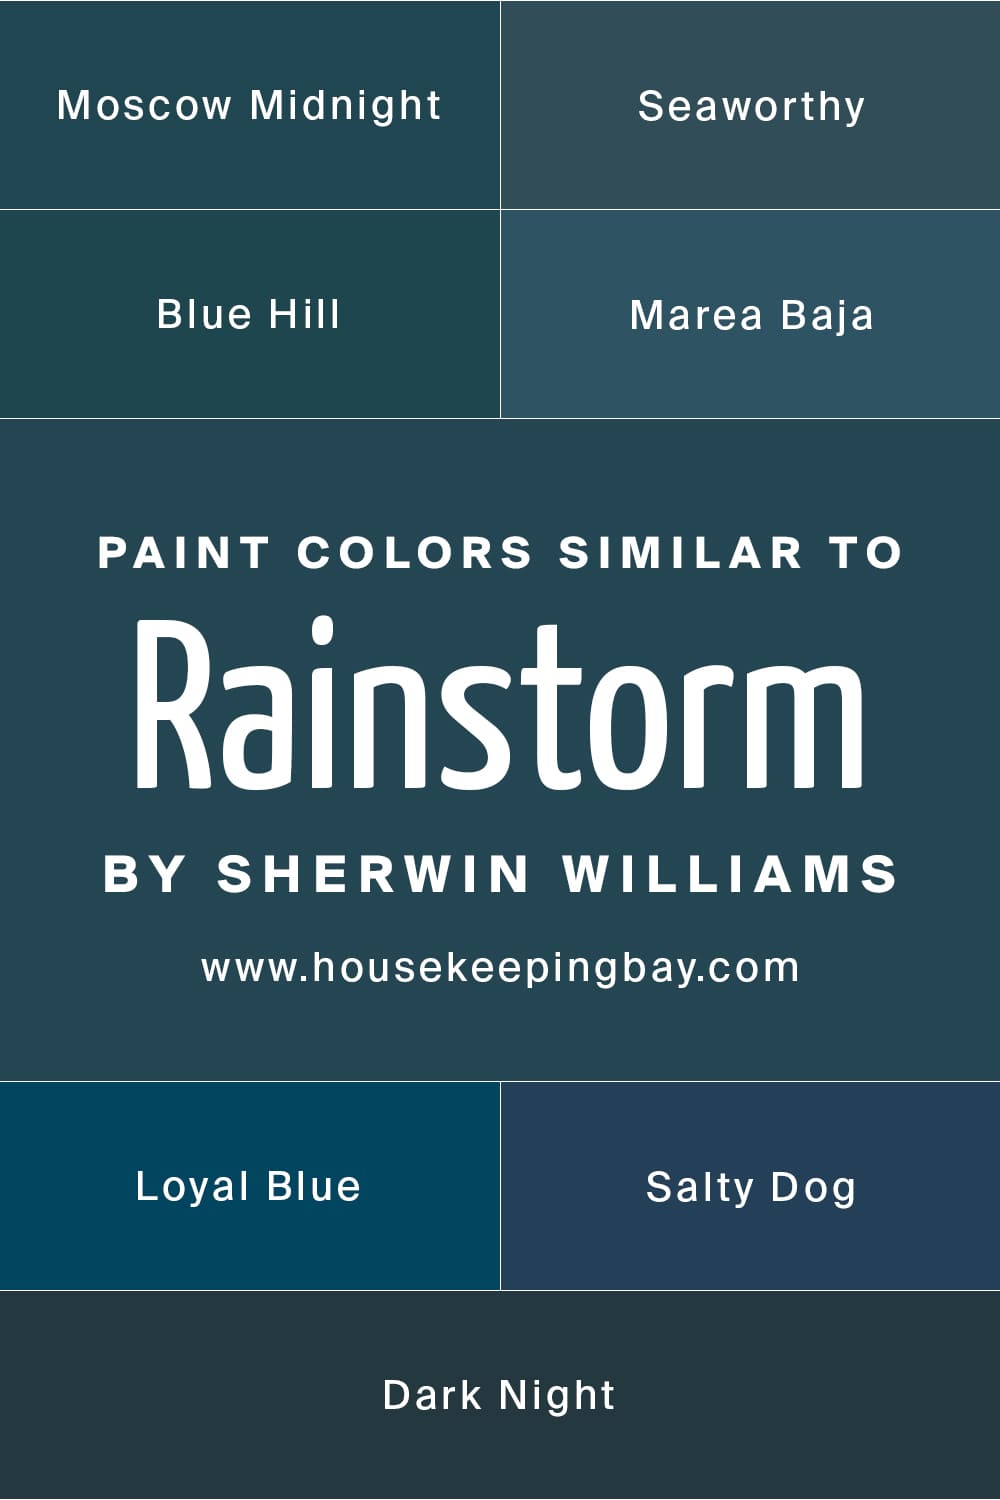 Paint Colors Similar to Rainstorm by Sherwin Williams